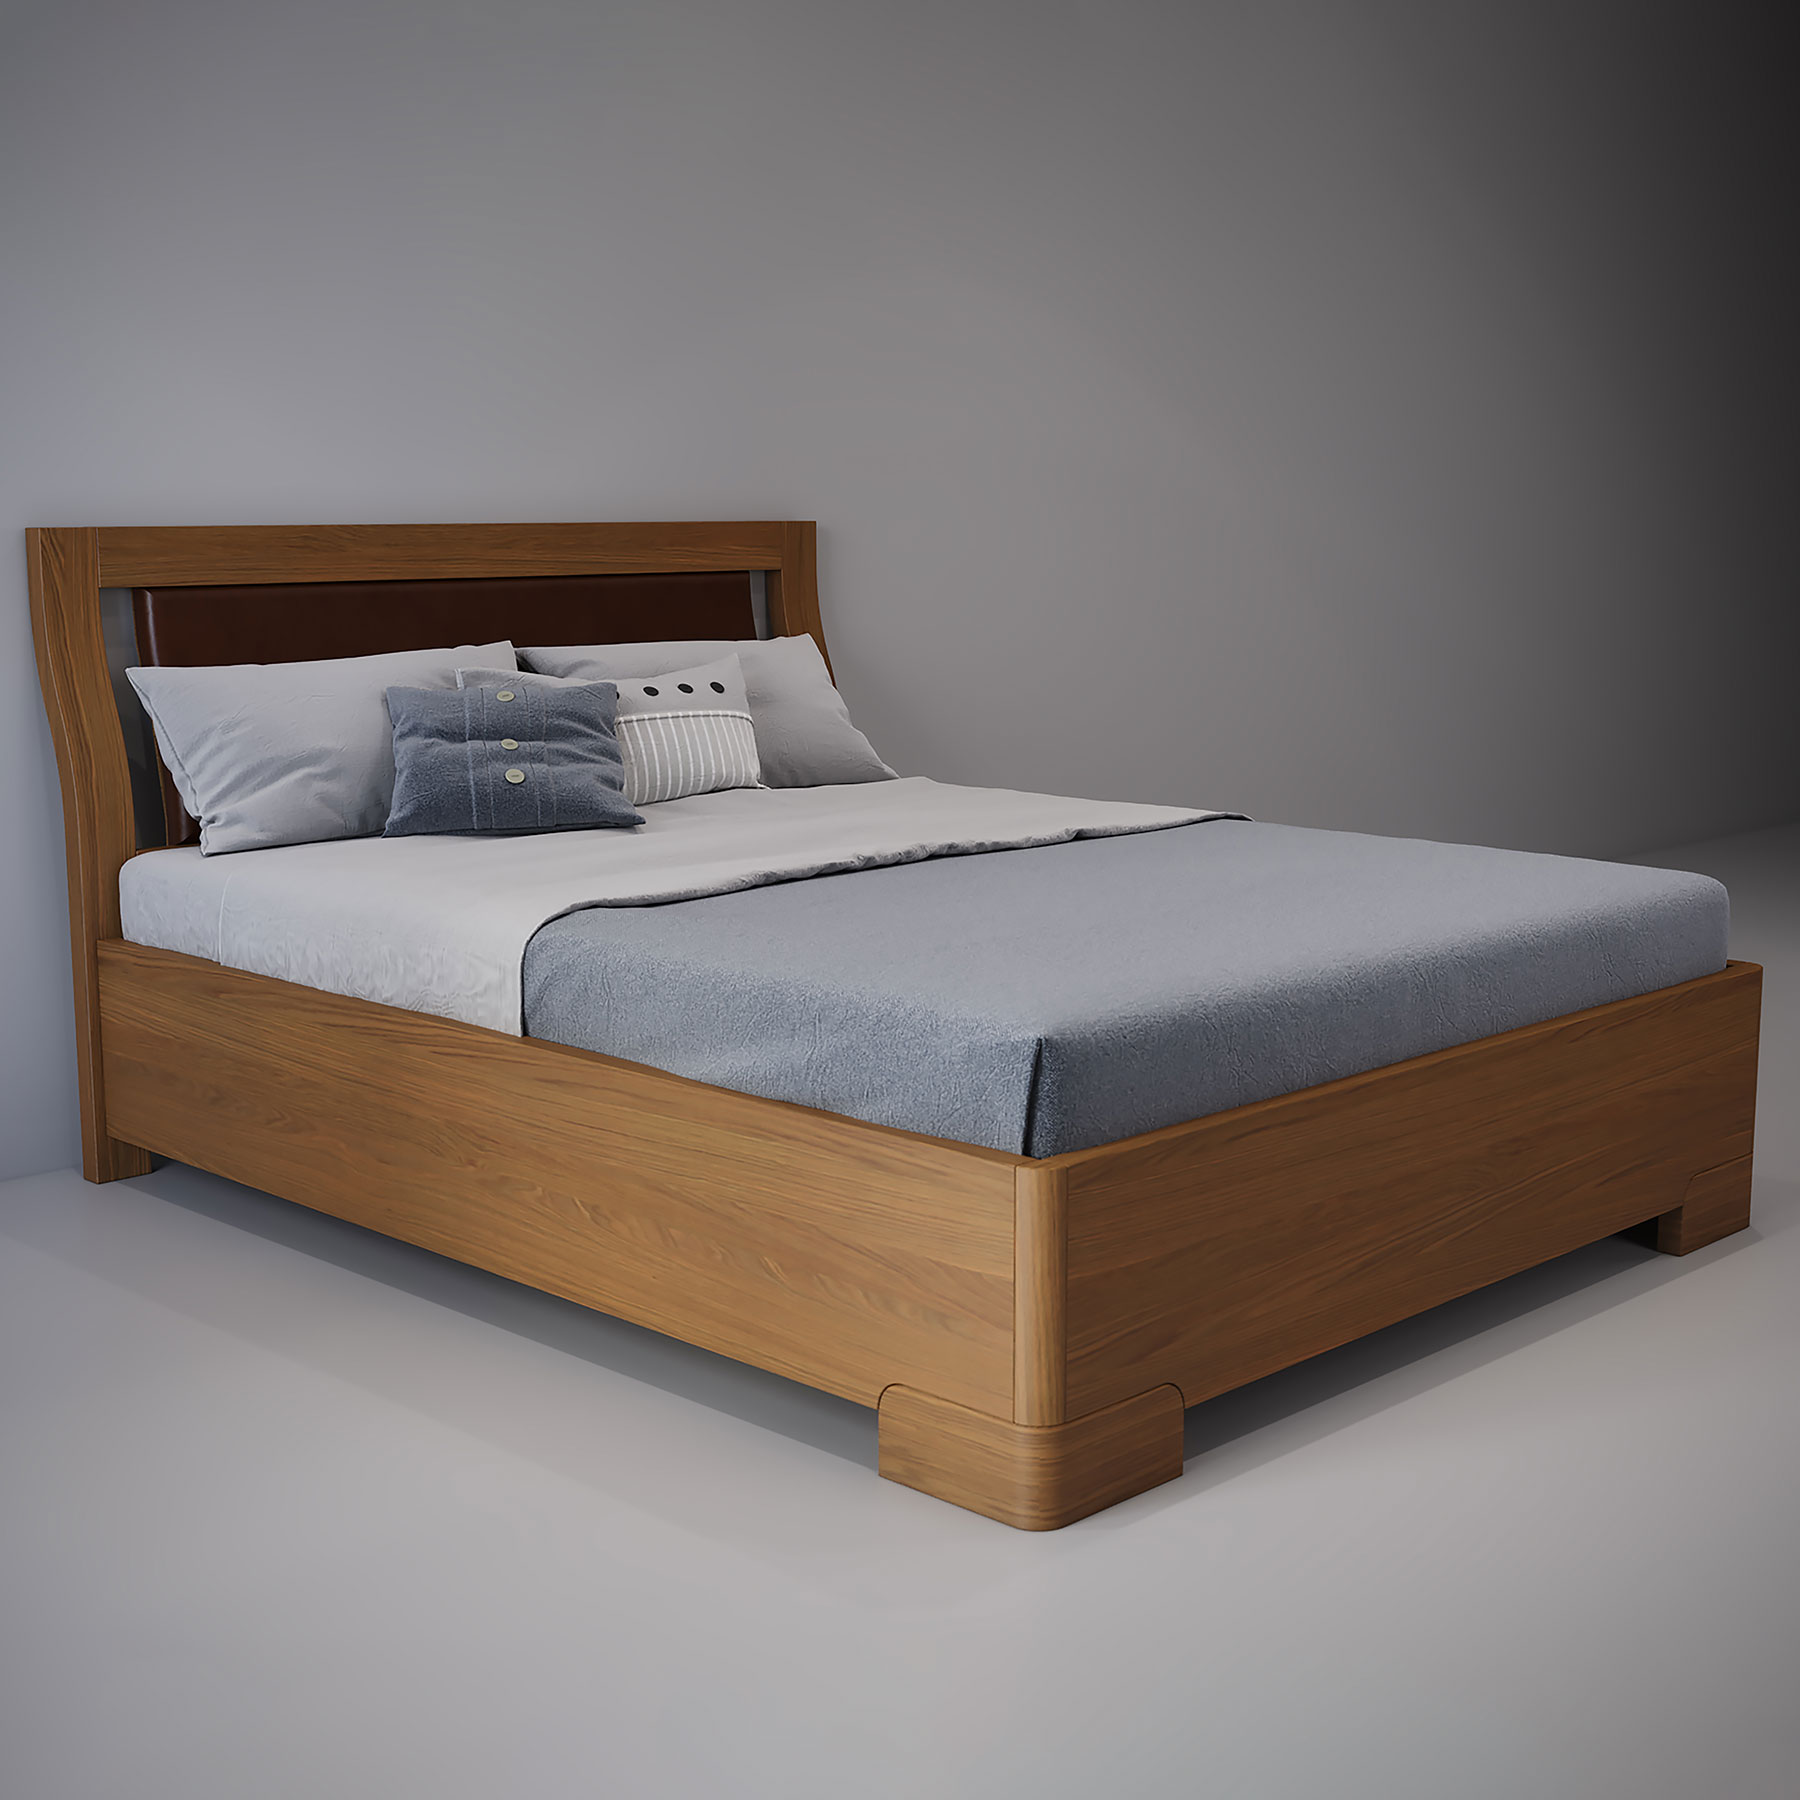 Double bed from the Verona collection